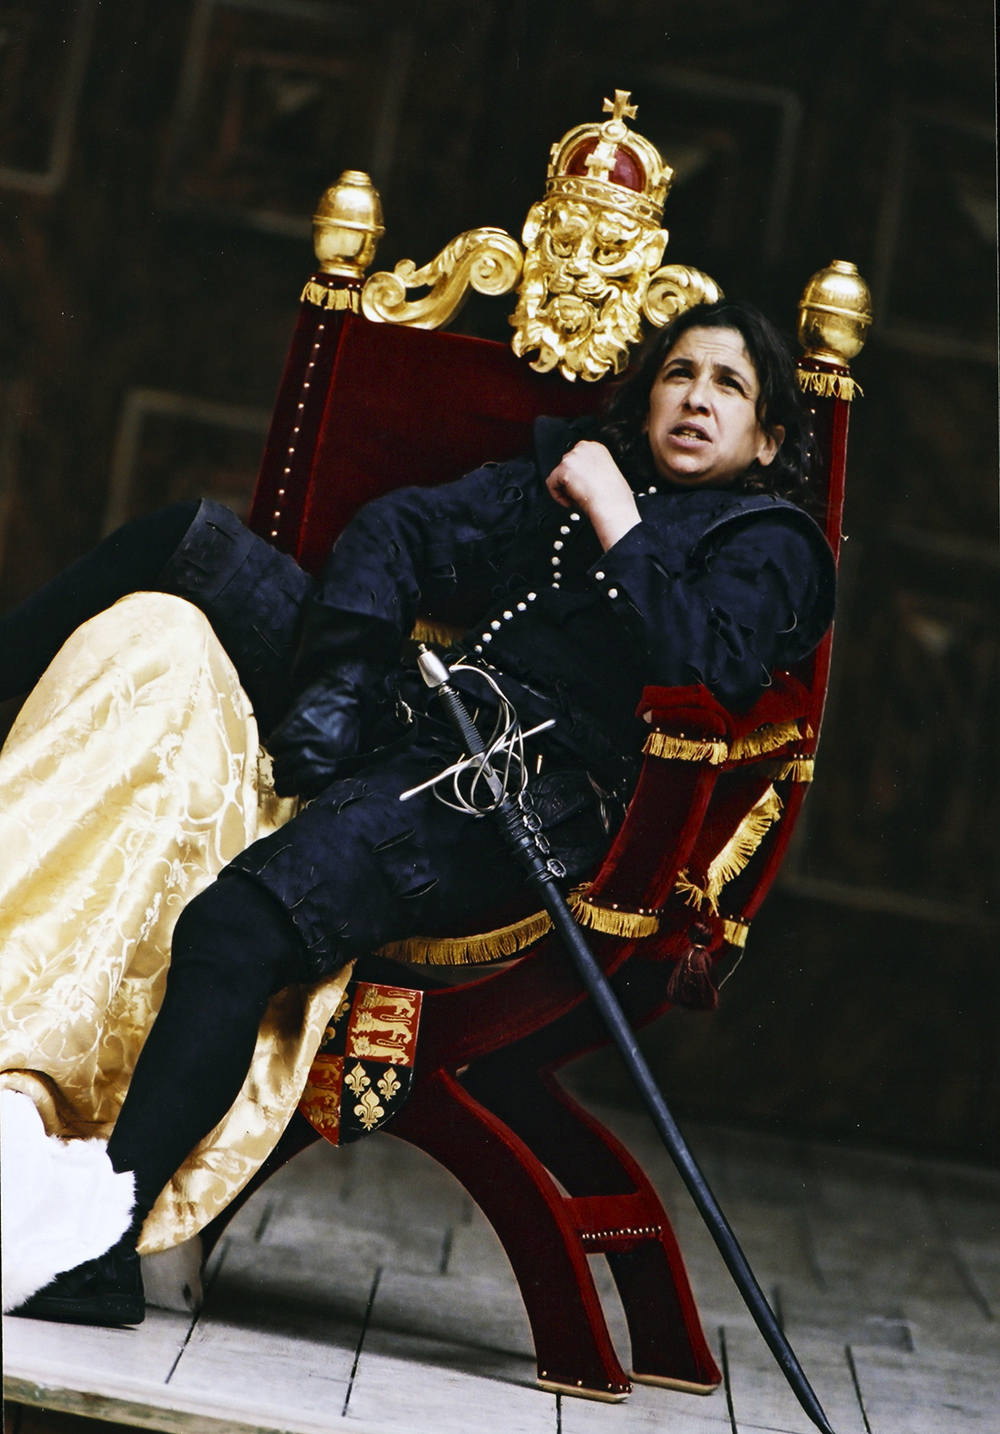 Actor sitting powerfully in a thrown